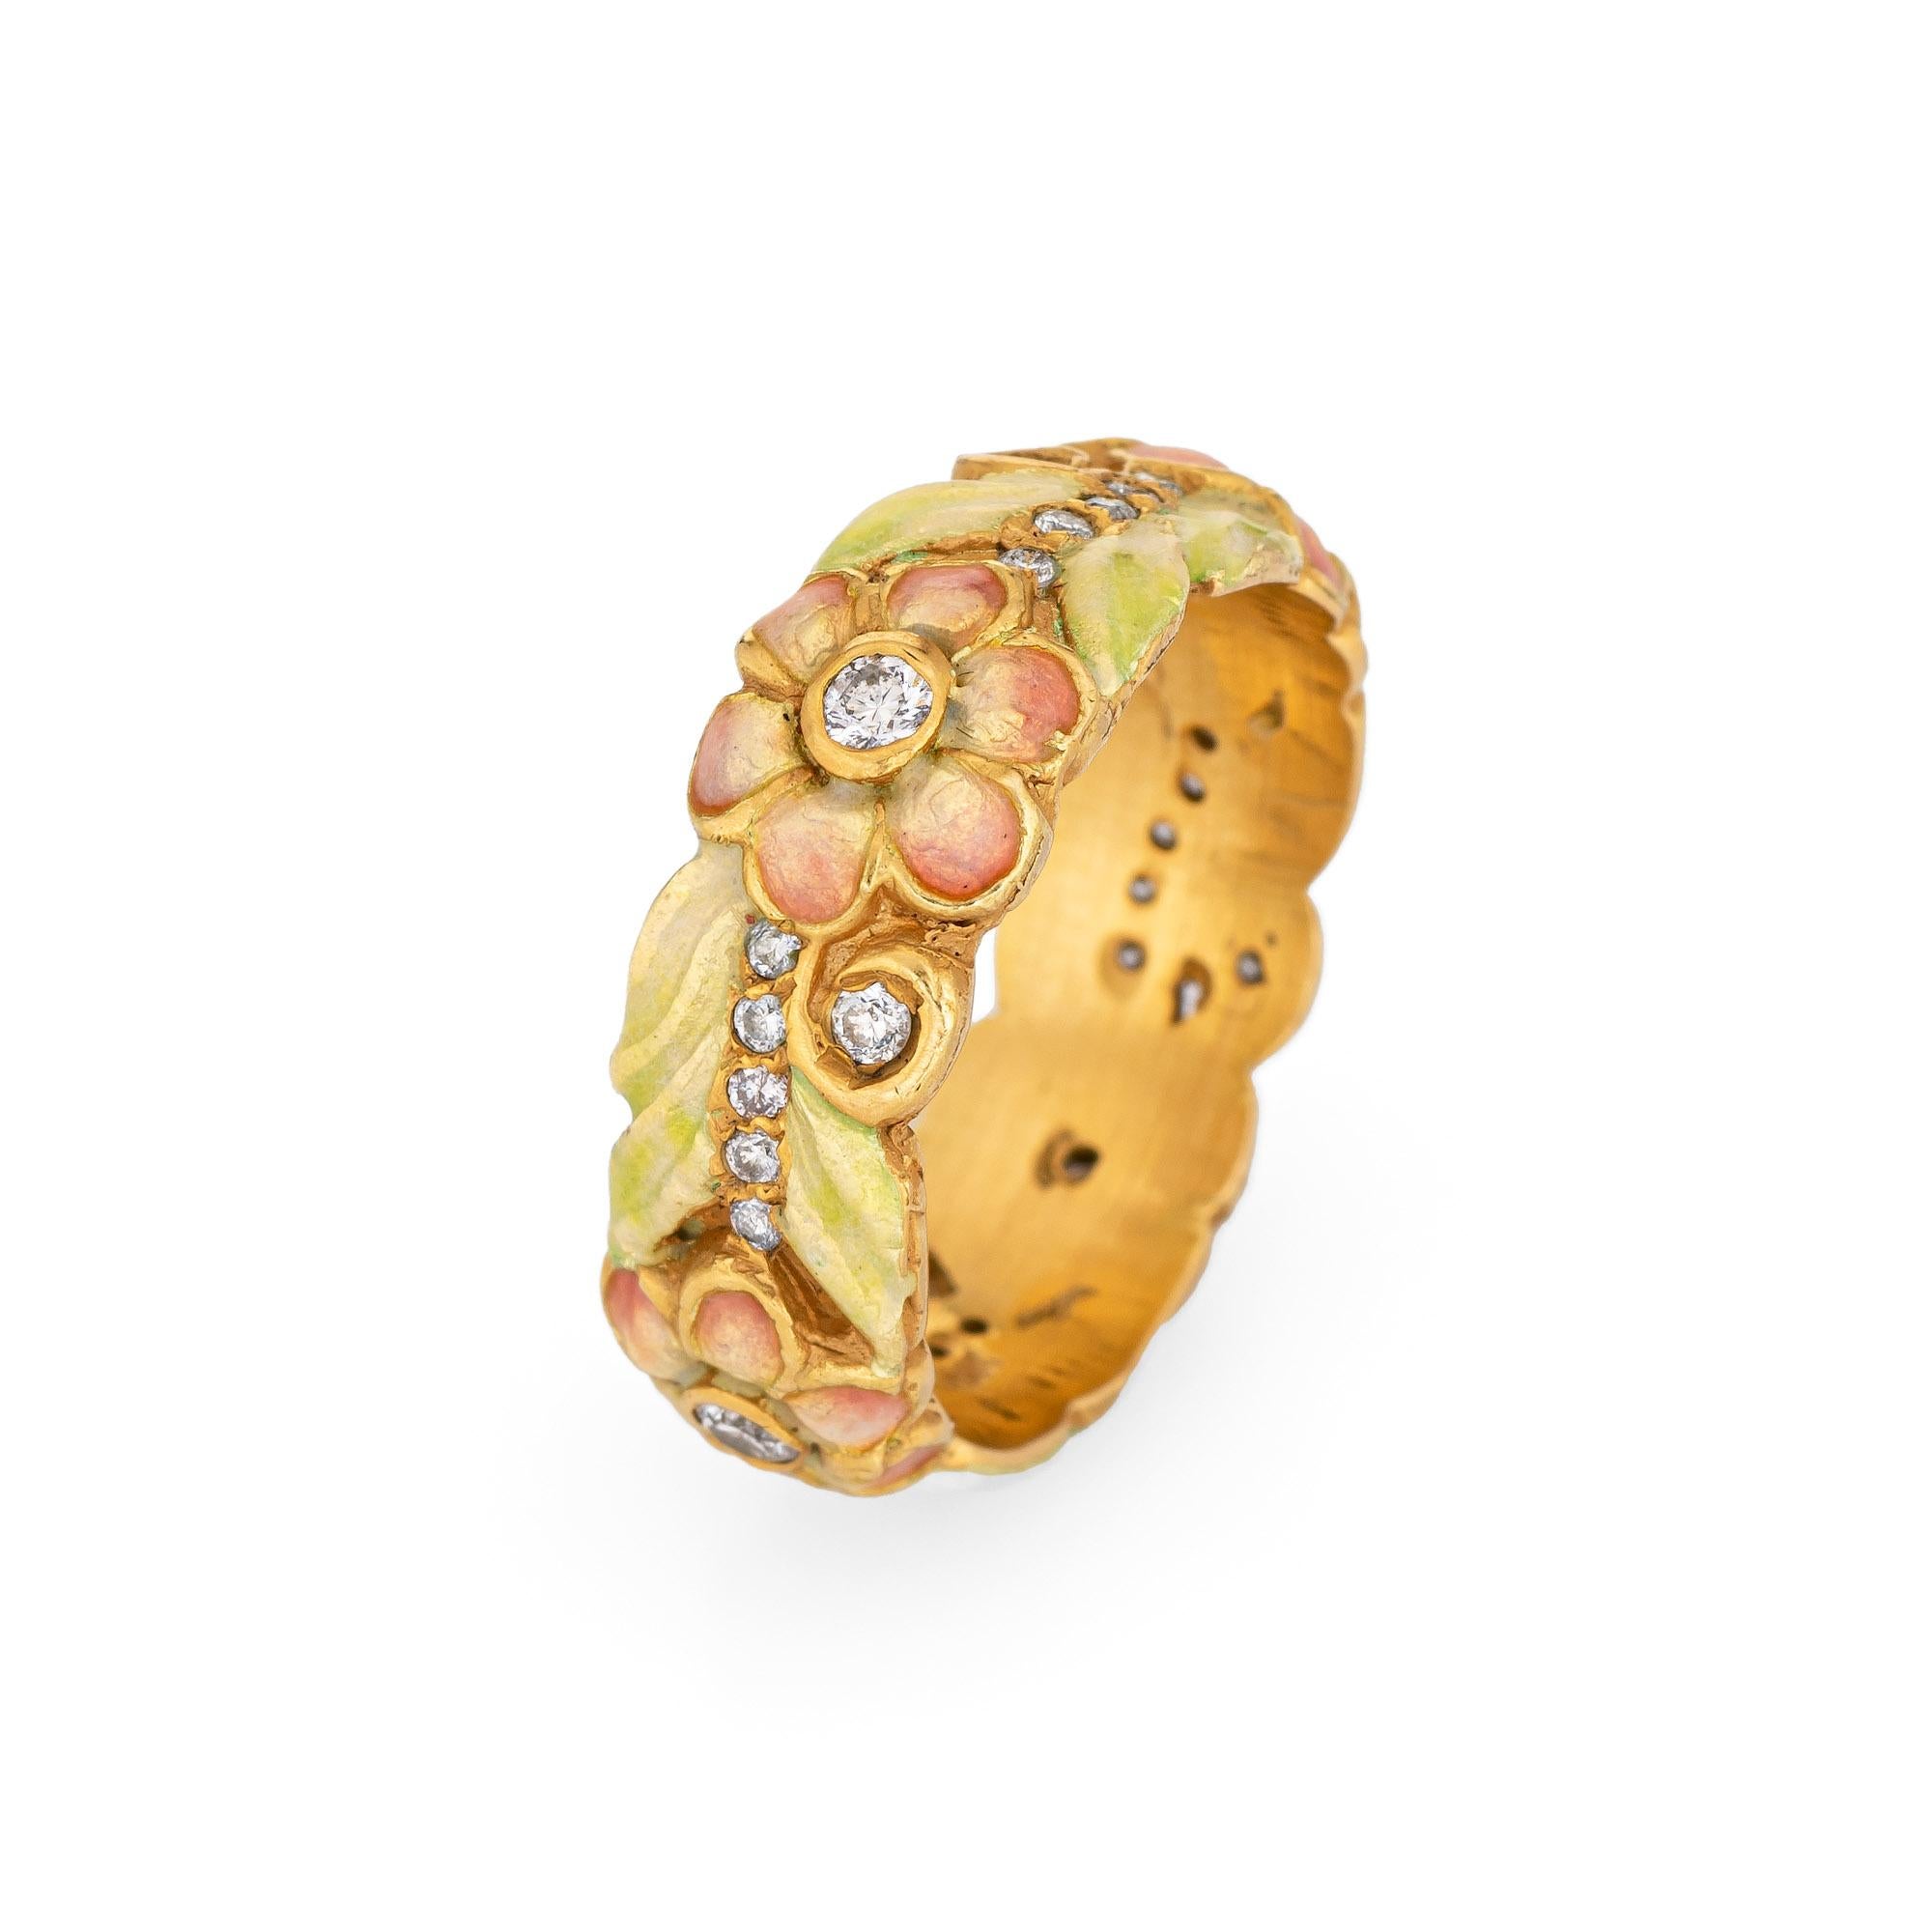 Elegant vintage enameled flower eternity ring crafted in 18 karat yellow gold. 

Diamonds total an estimated 0.40 carats (estimated at H-I color and VS2-SI1 clarity).   

The beautifully detailed ring features green and pink pastel colored enamel,